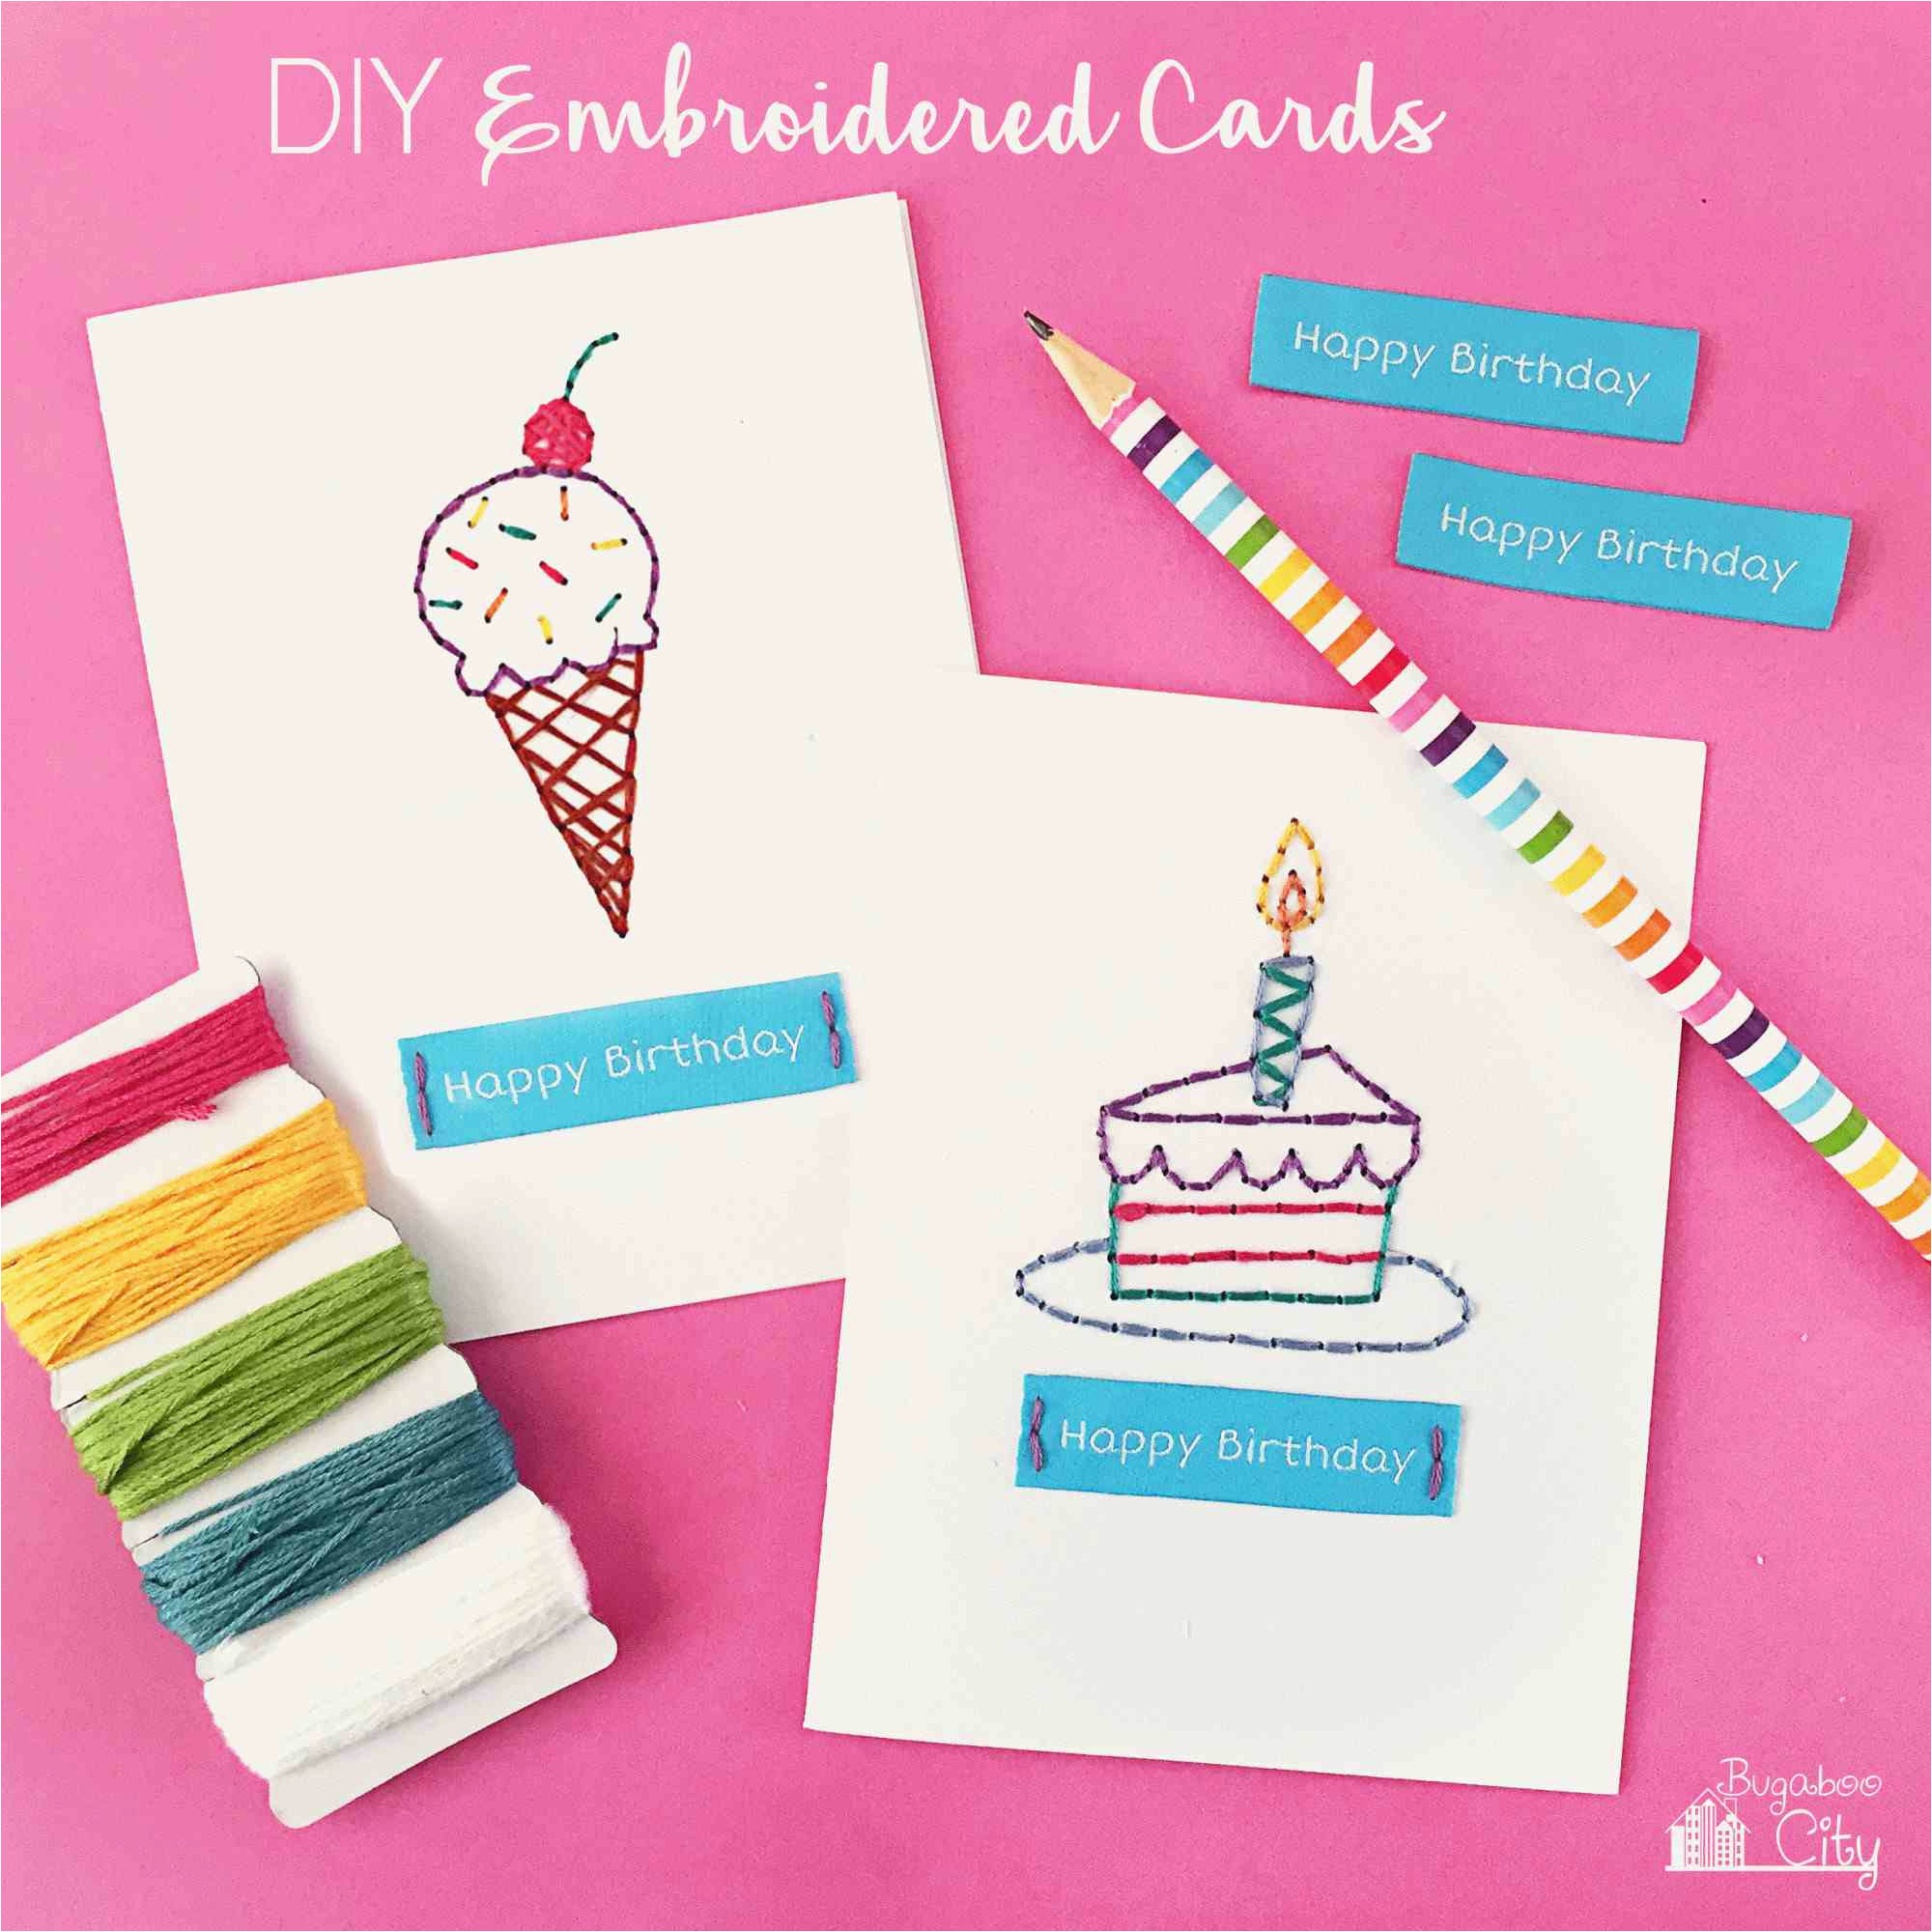 Happy Birthday Cards Homemade Ideas Diy Birthday Card Ideas For Grandma Get Inspiration From 25 Of The